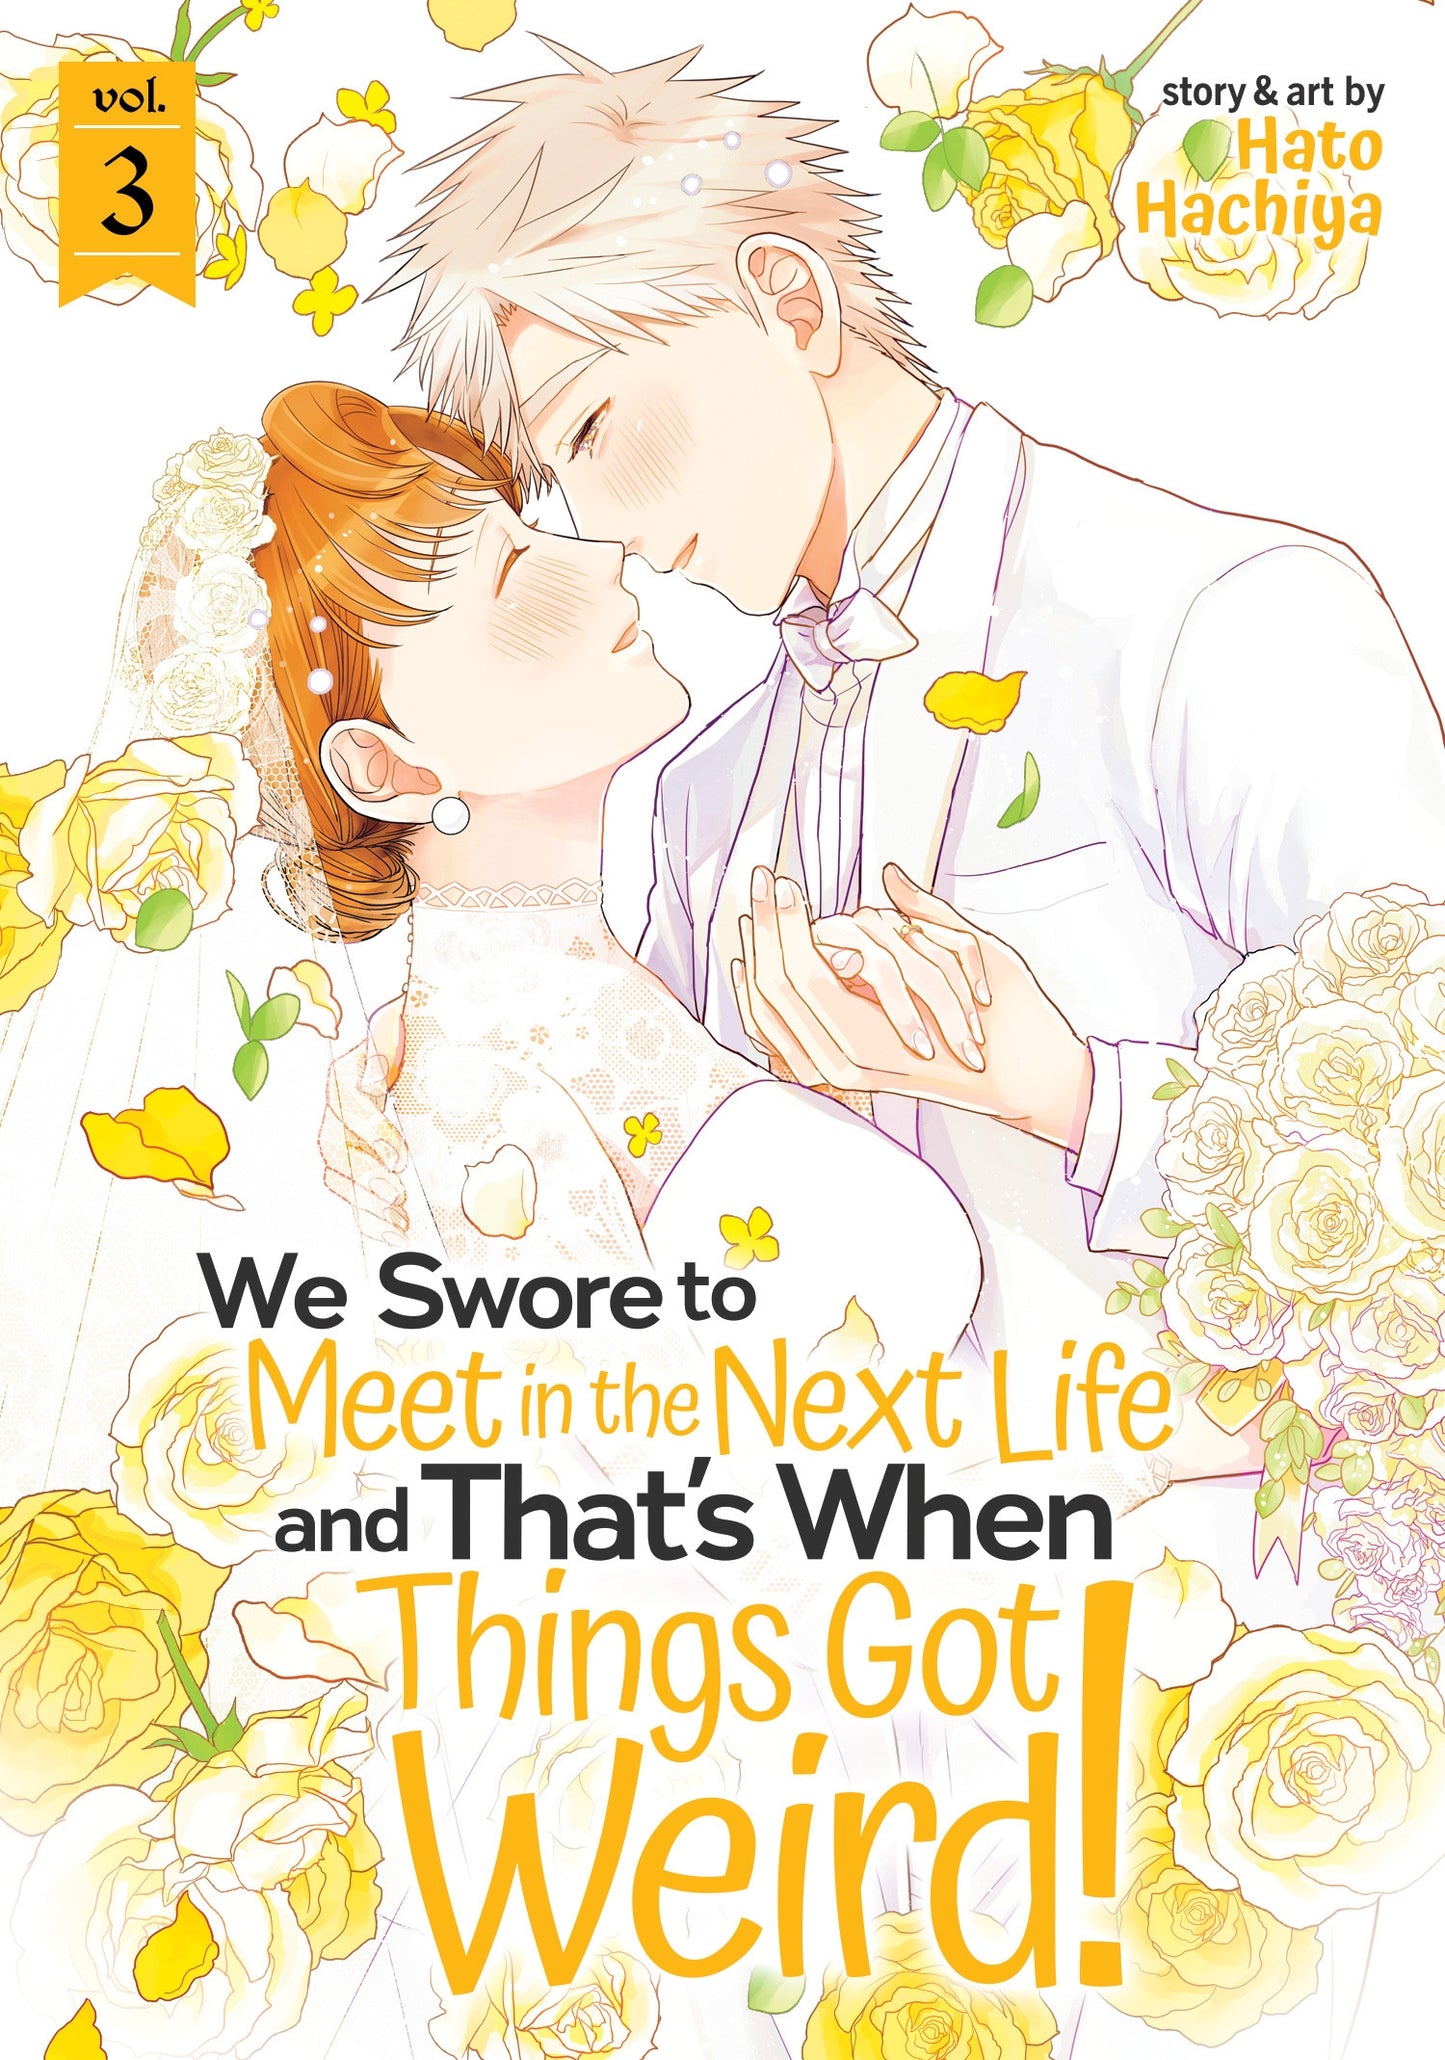 We Swore to Meet in the Next Life and That's When Things Got Weird! Vol. 3 - Manga Warehouse